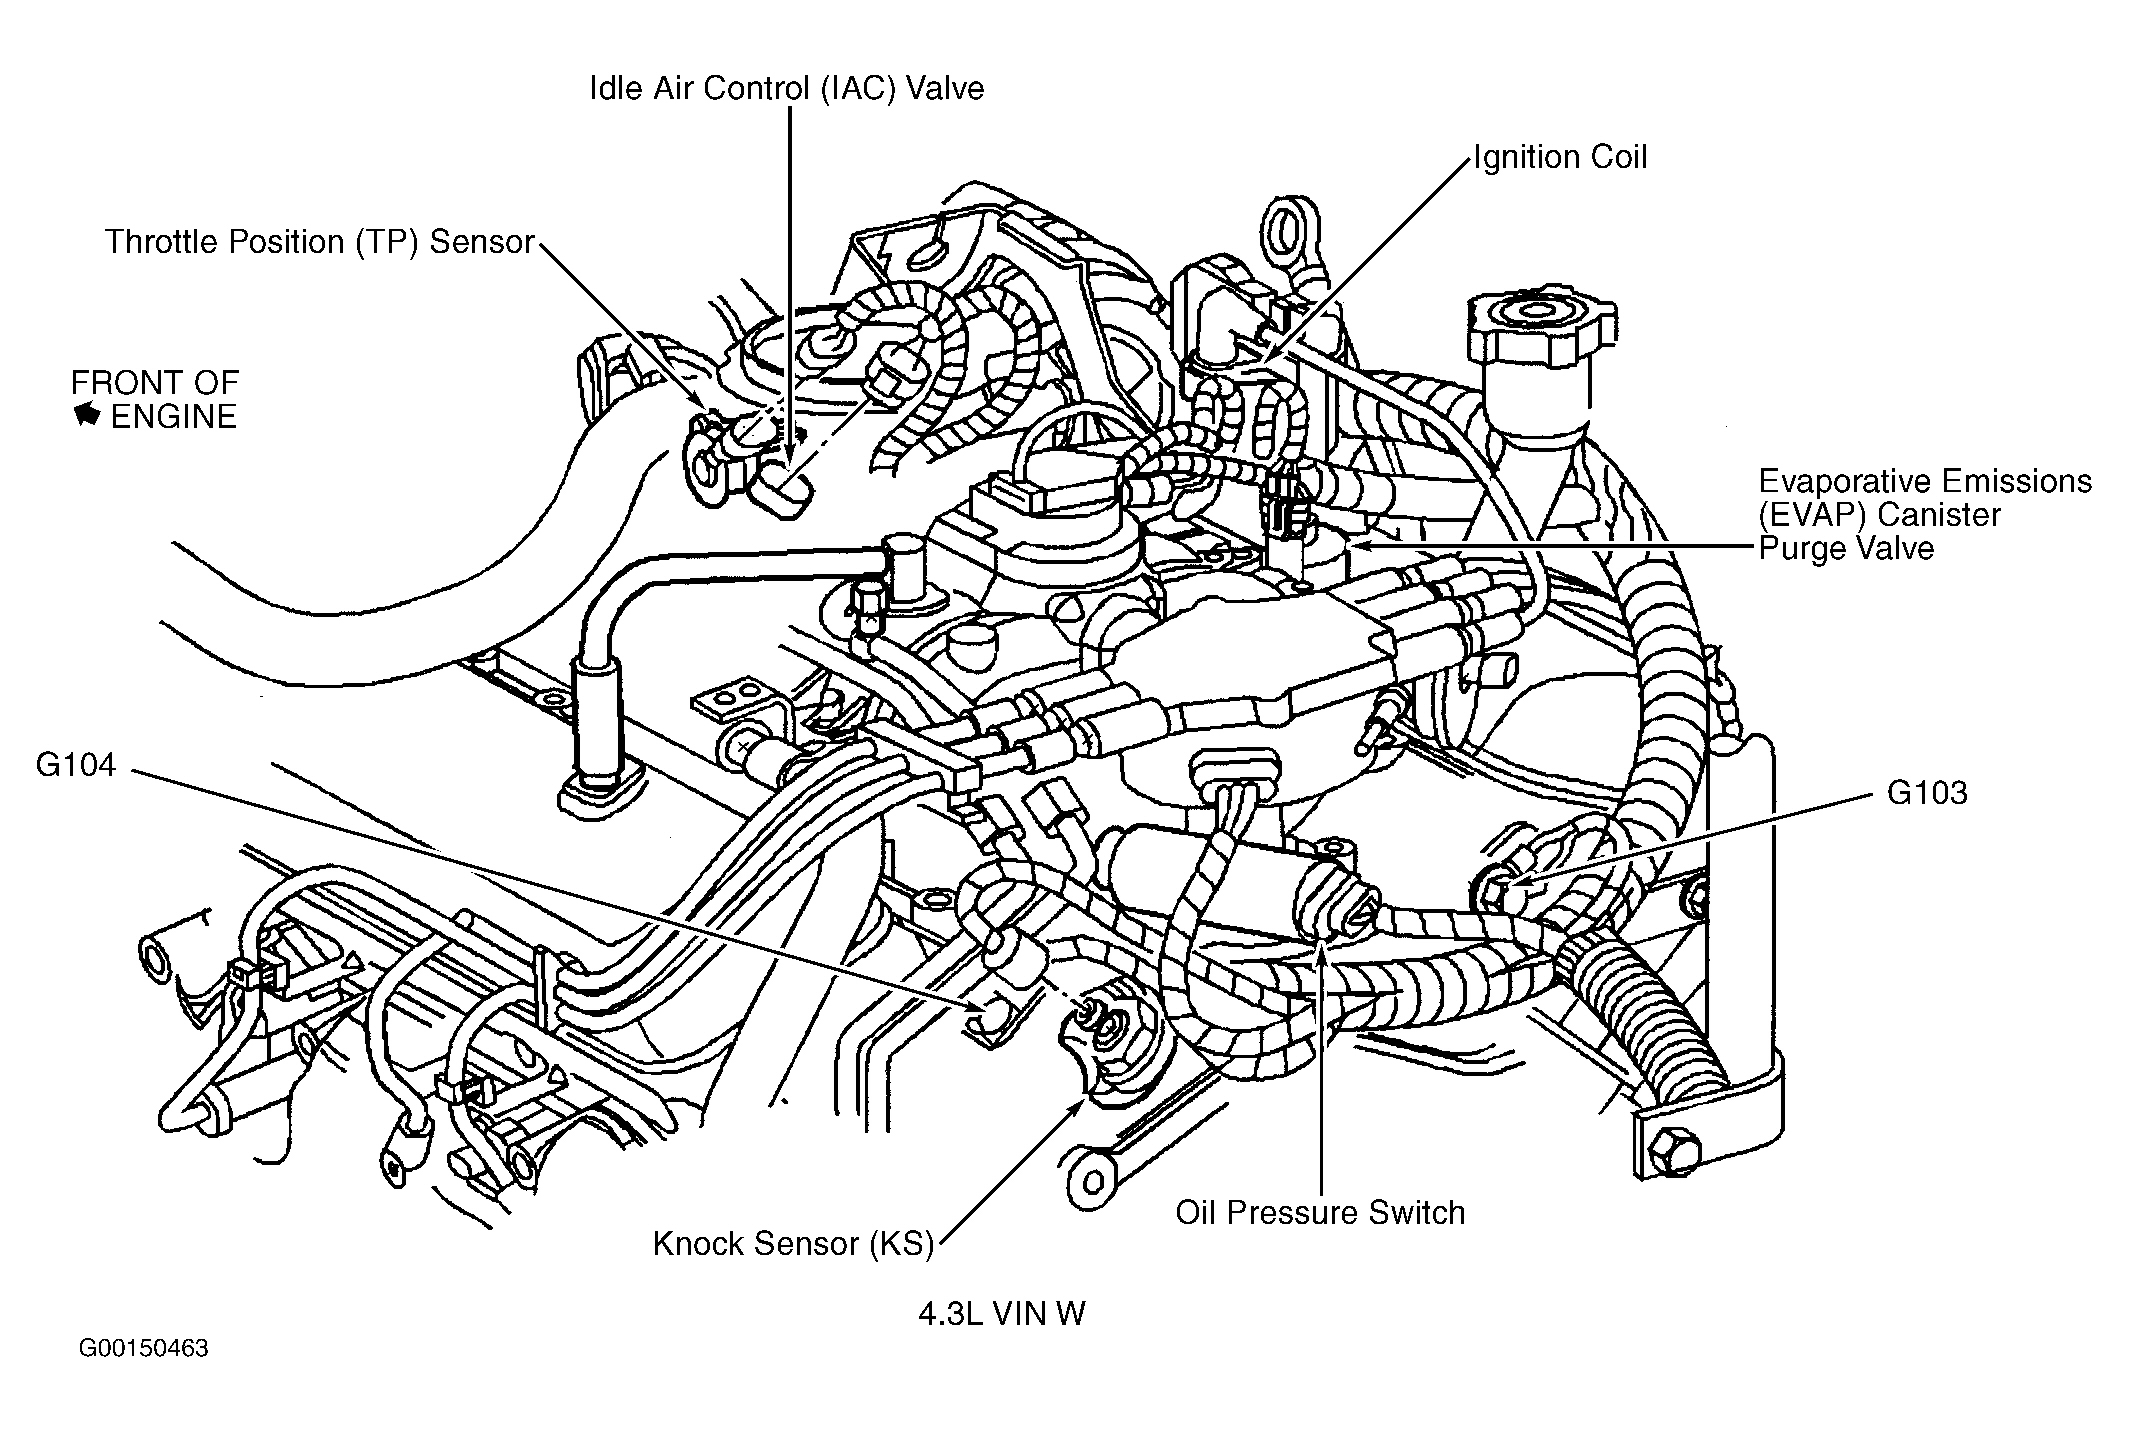 Chevrolet Tahoe 2000 - Component Locations -  Rear of Engine (4.3L VIN W)